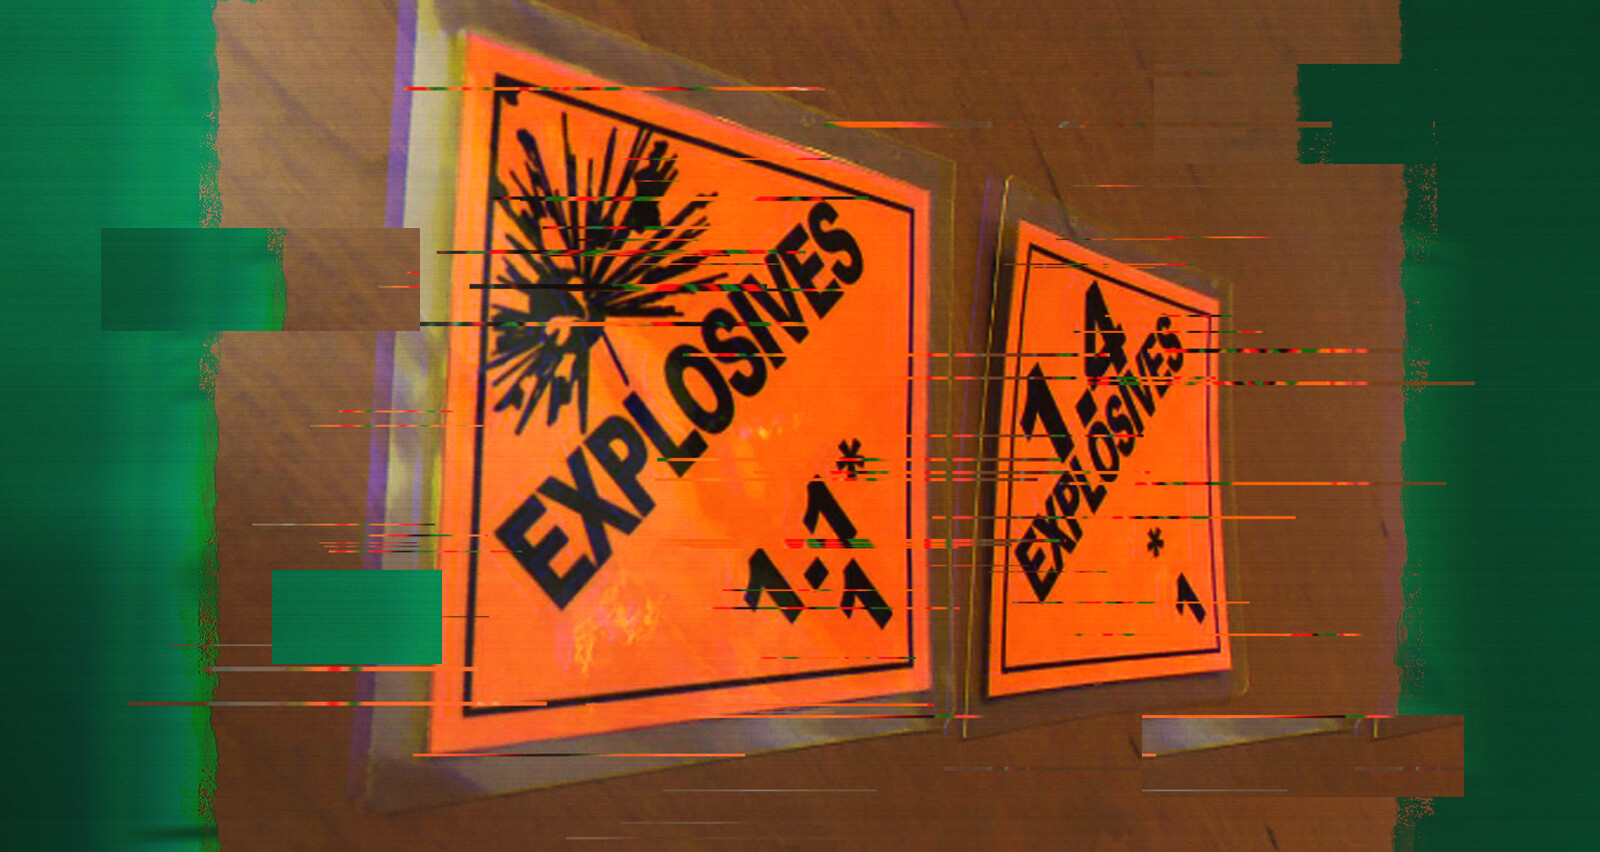 Things That Go Boom (Part 1) Featured Image - Orange Explosive Warning Signs.